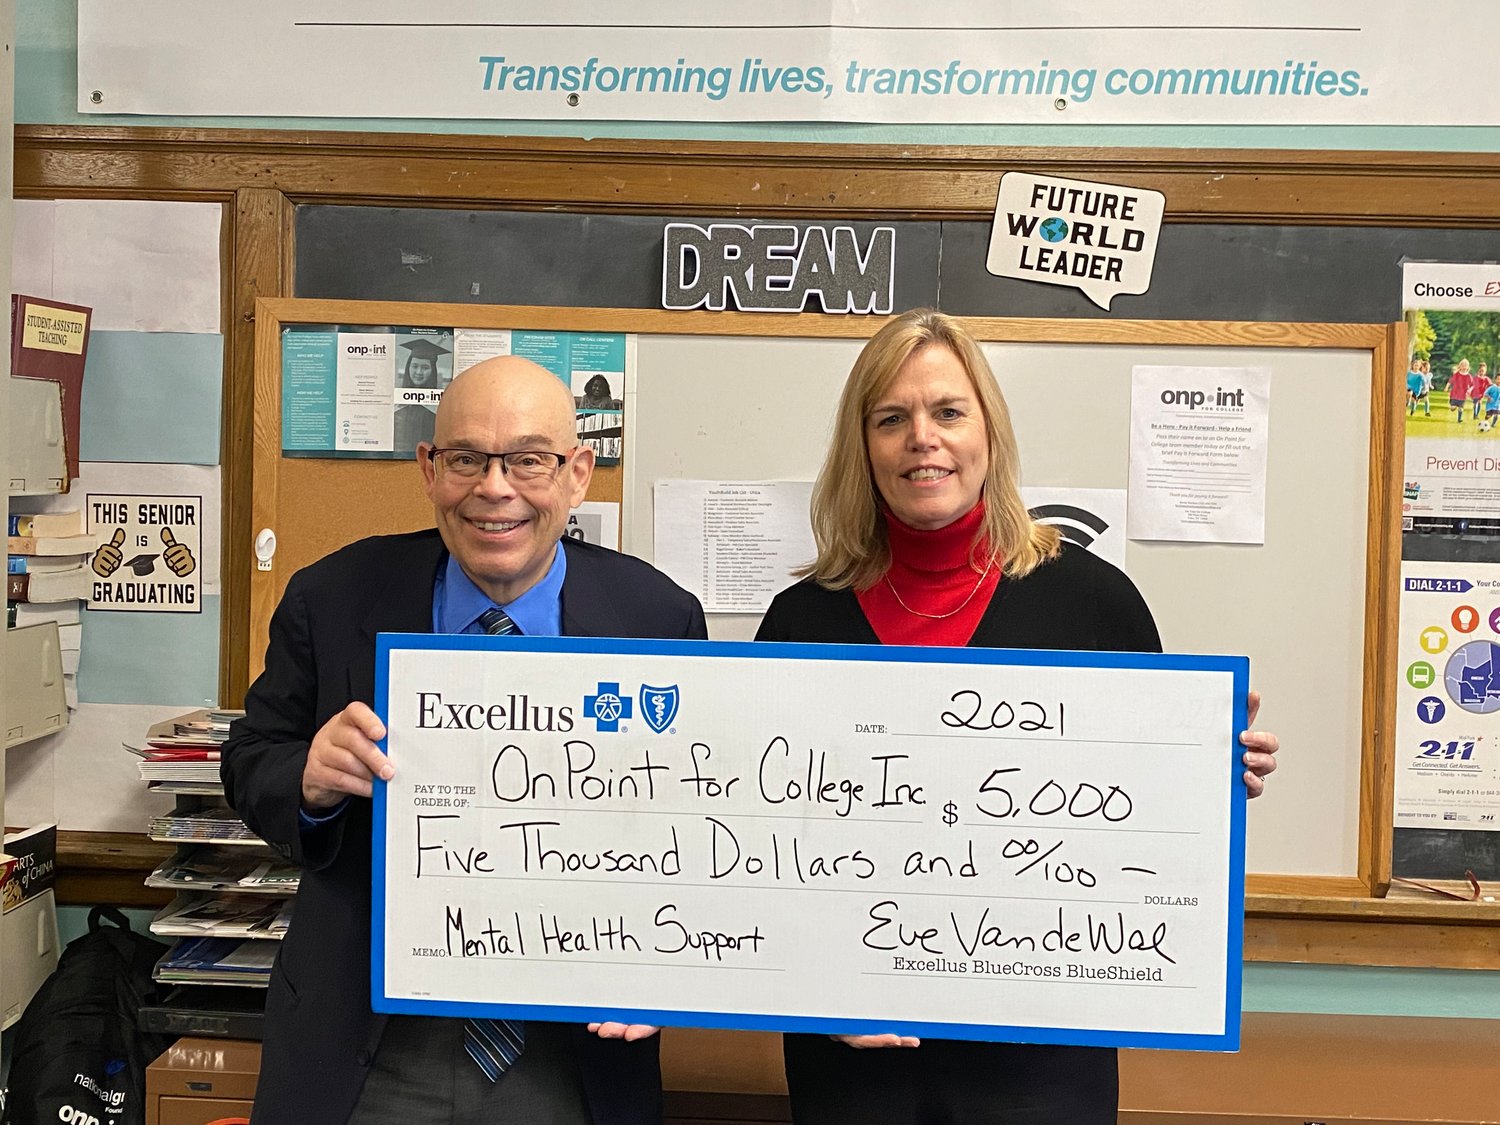 FUNDS TO SUPPORT MENTAL HEALTH EFFORT — Eve Van de Wal, Excellus BlueCross BlueShield Utica regional president, right,  presents Kevin Marken, Utica director of On Point for College with a $5,000 grant to help support a new mental health program for students.